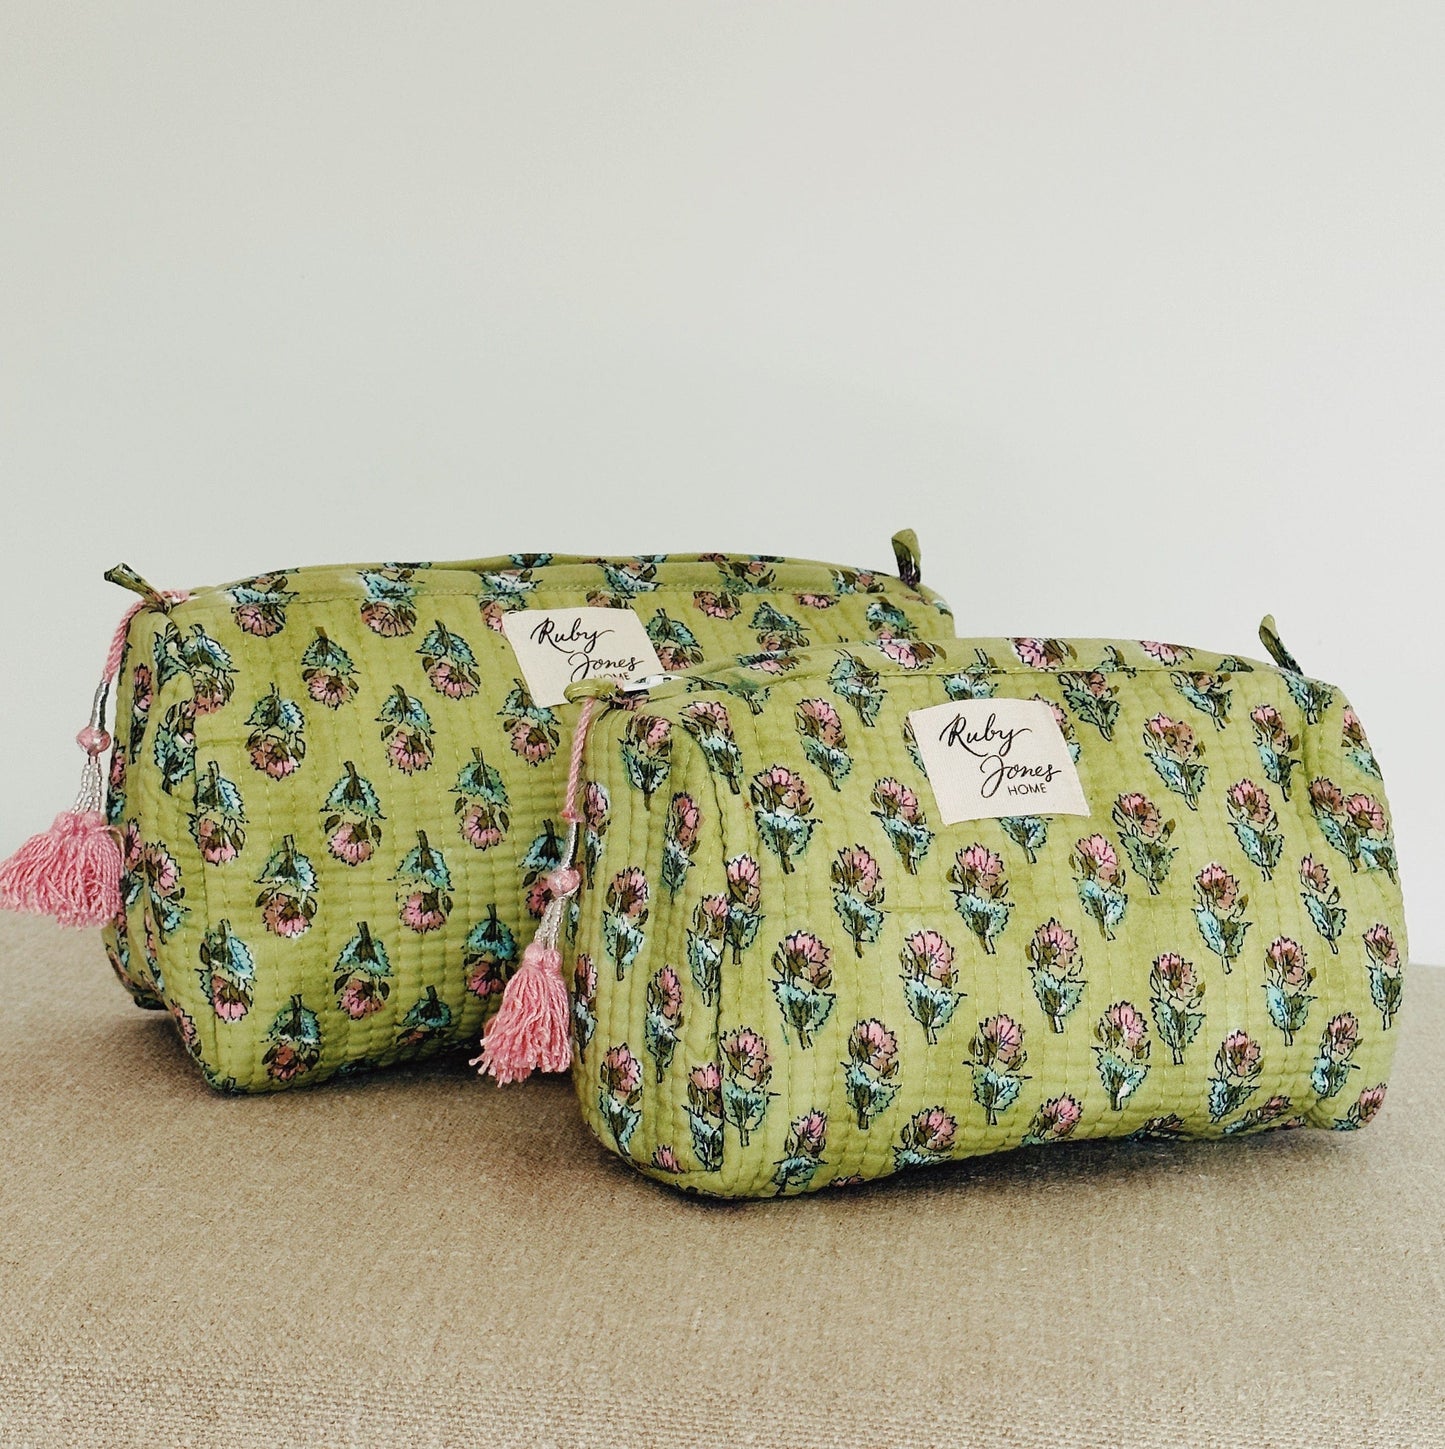 Lifestyle Cosmetics Bag - Pea Green & Pink Flowers